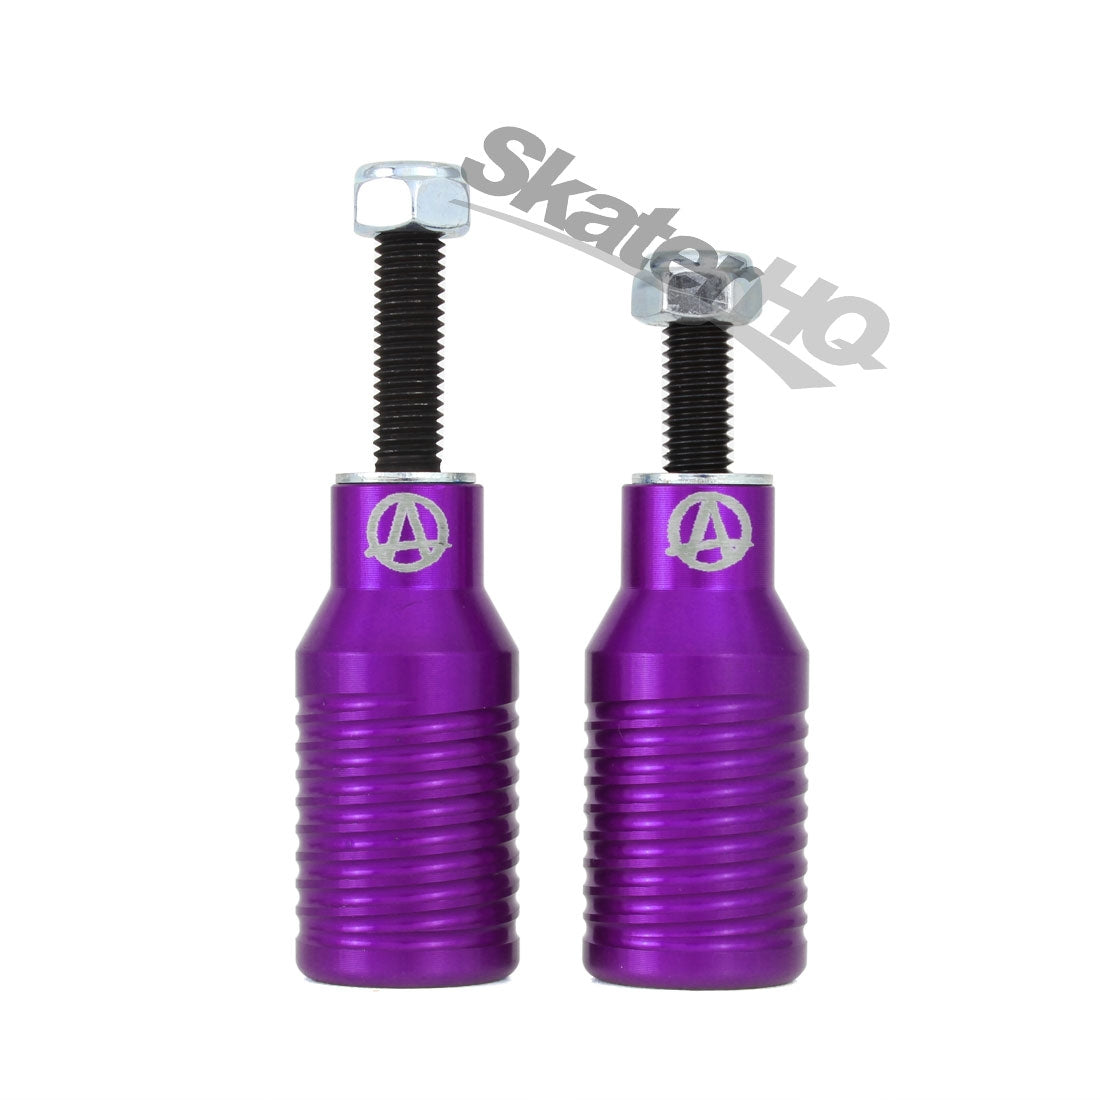 Apex Bowie Pegs 2pk - Purple Scooter Hardware and Parts